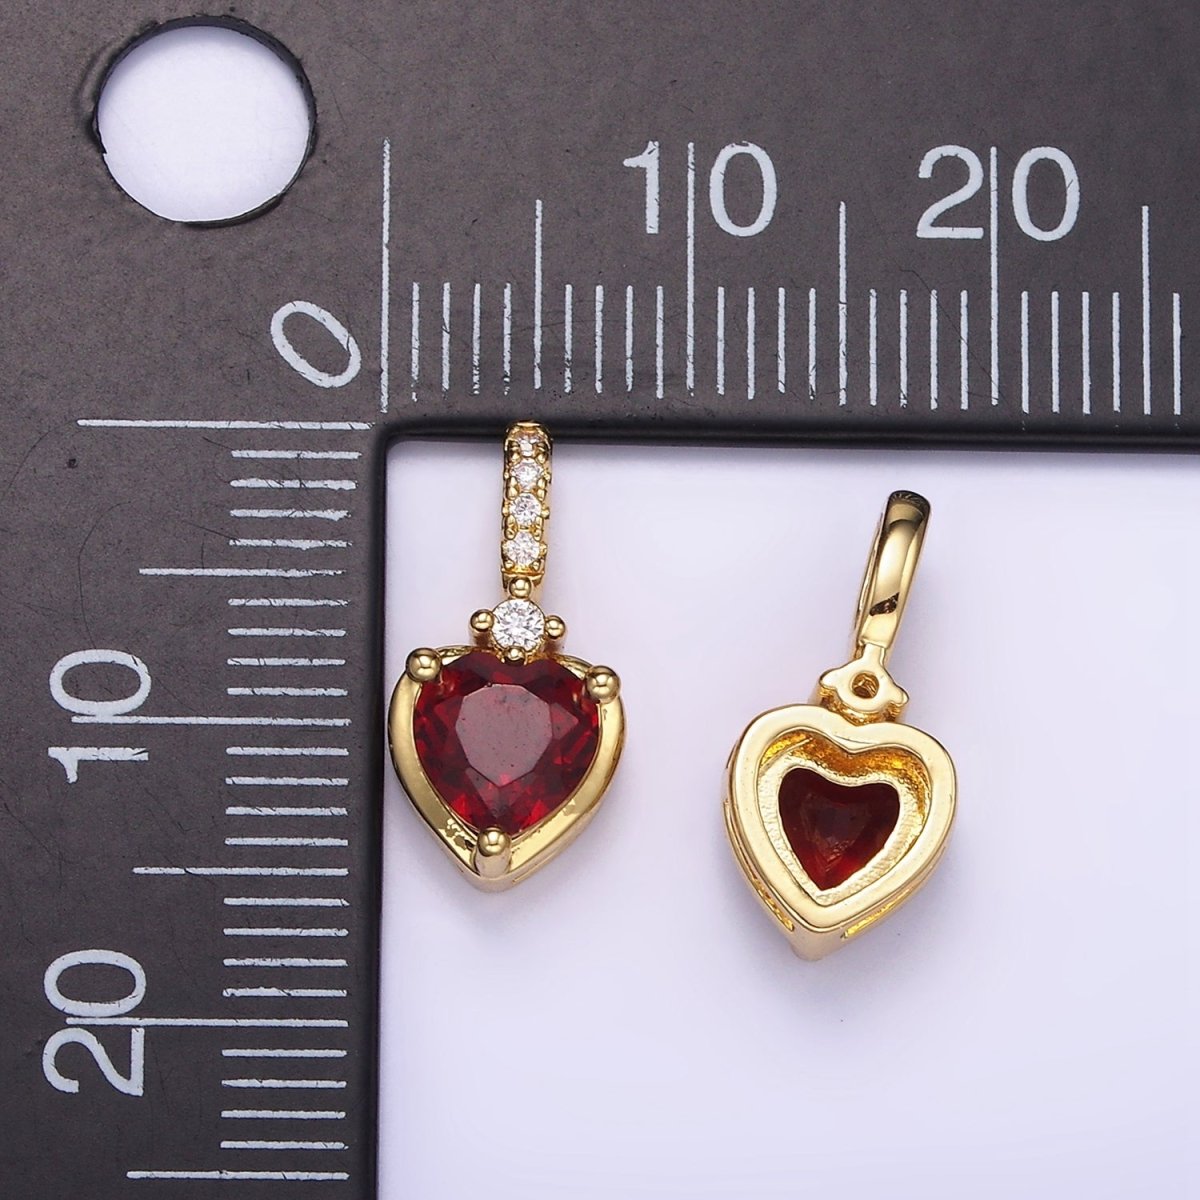 24K Gold Filled Heart Dark Red CZ Micro Paved Bail Pendant | H329 - DLUXCA